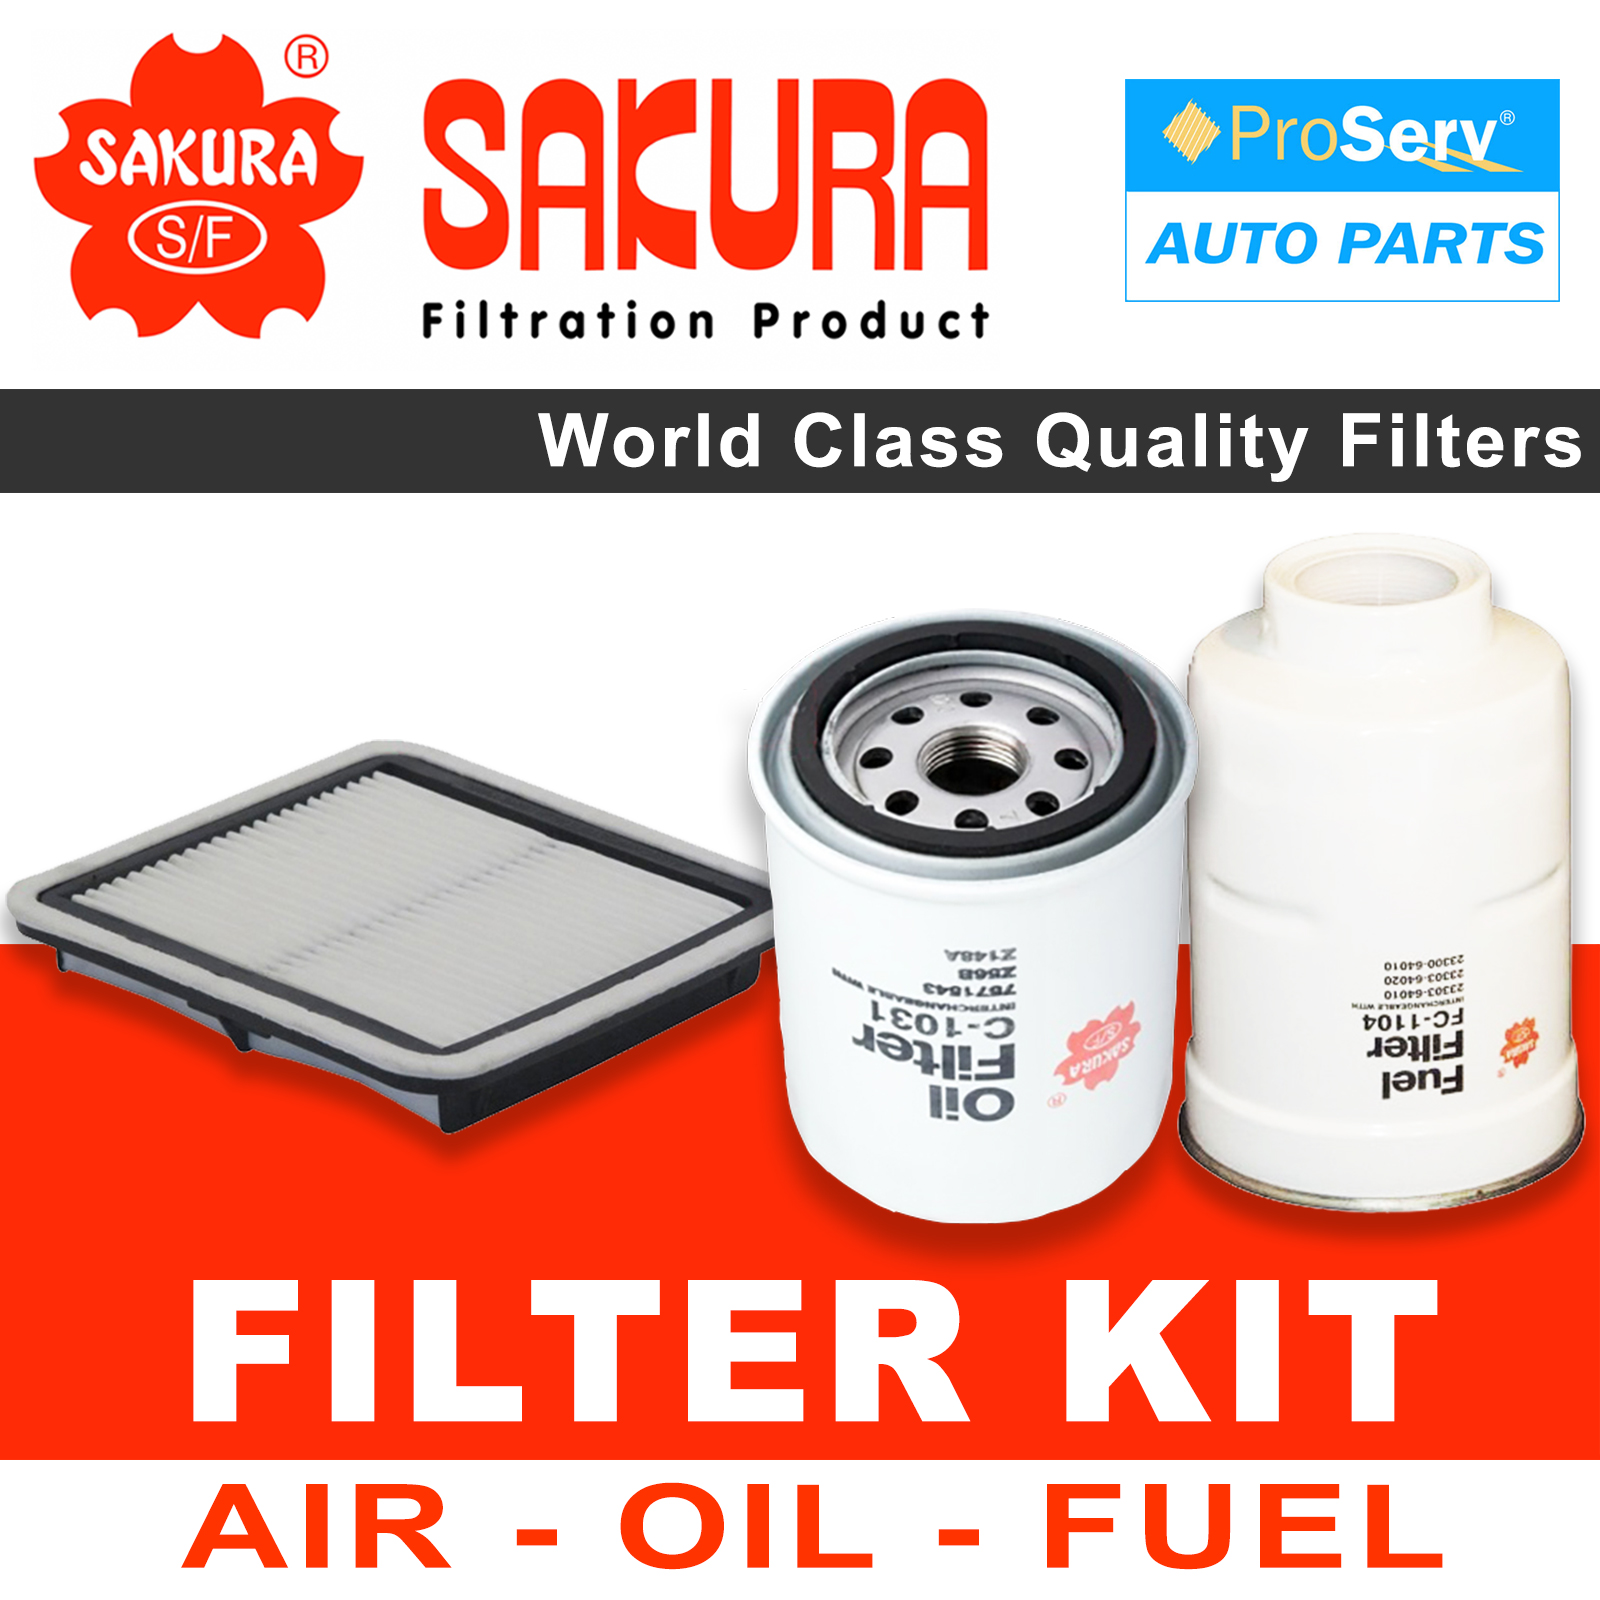 Oil Air Fuel Filter service kit for Subaru Forester SH 2